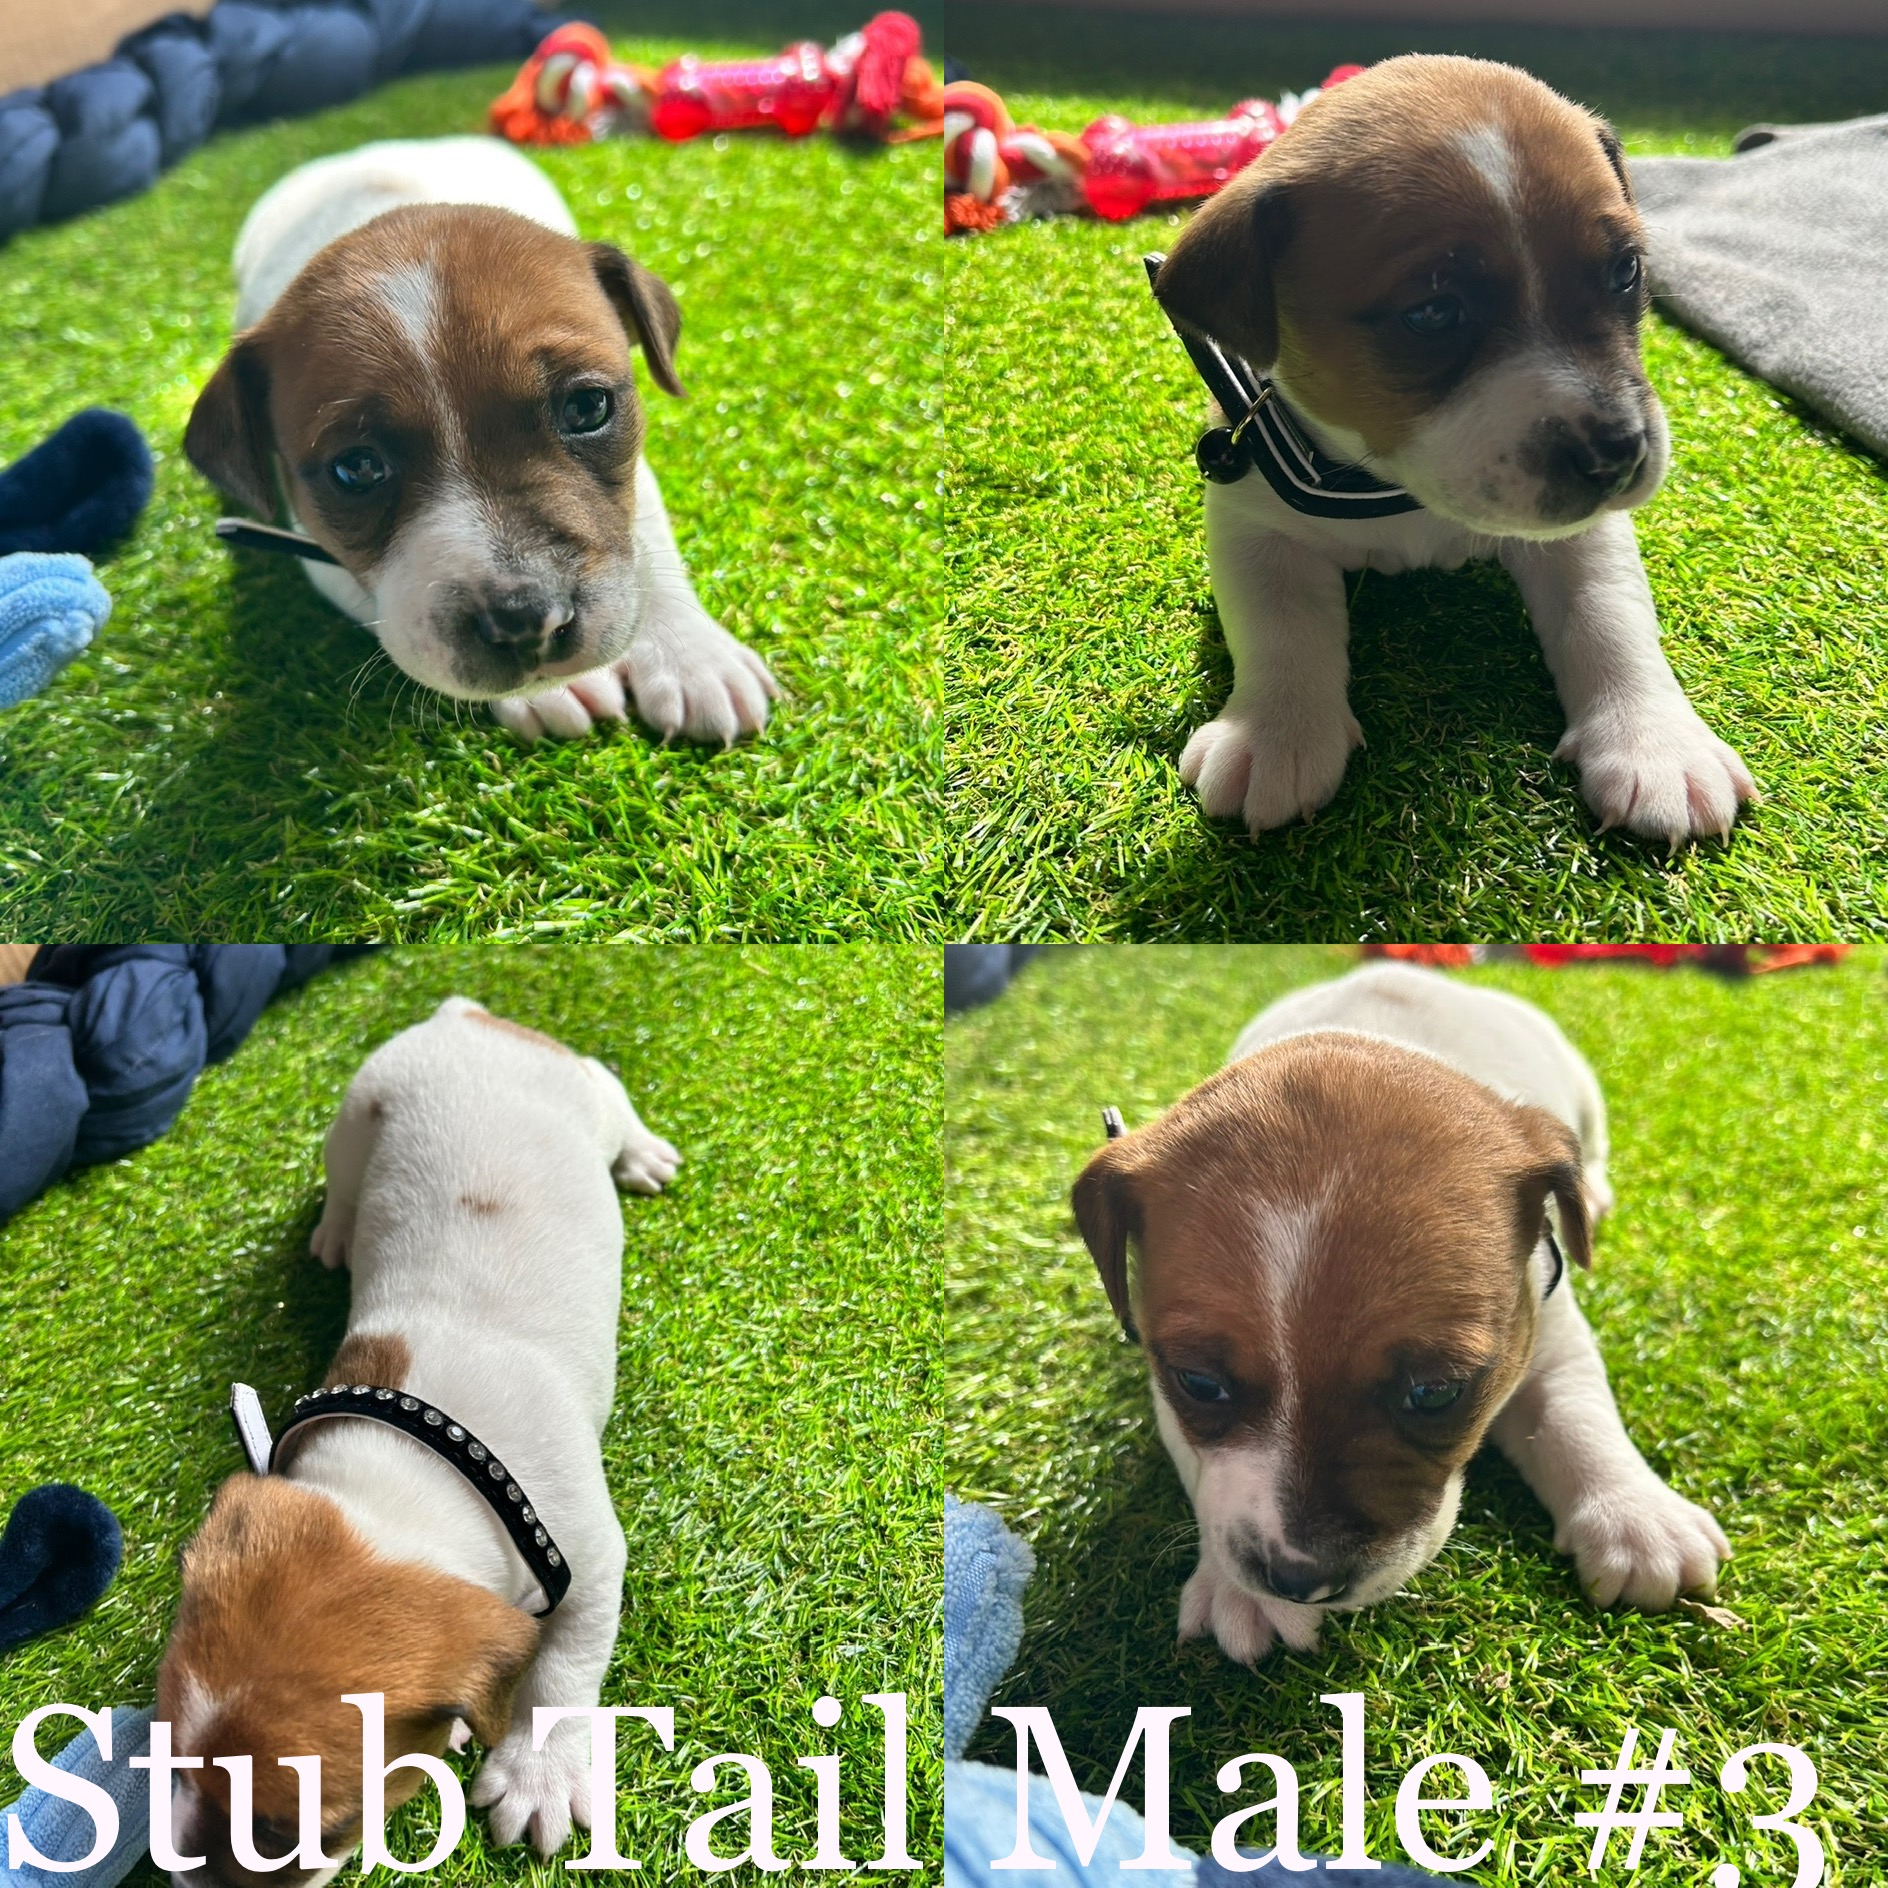 Purebred Jack Russell pups